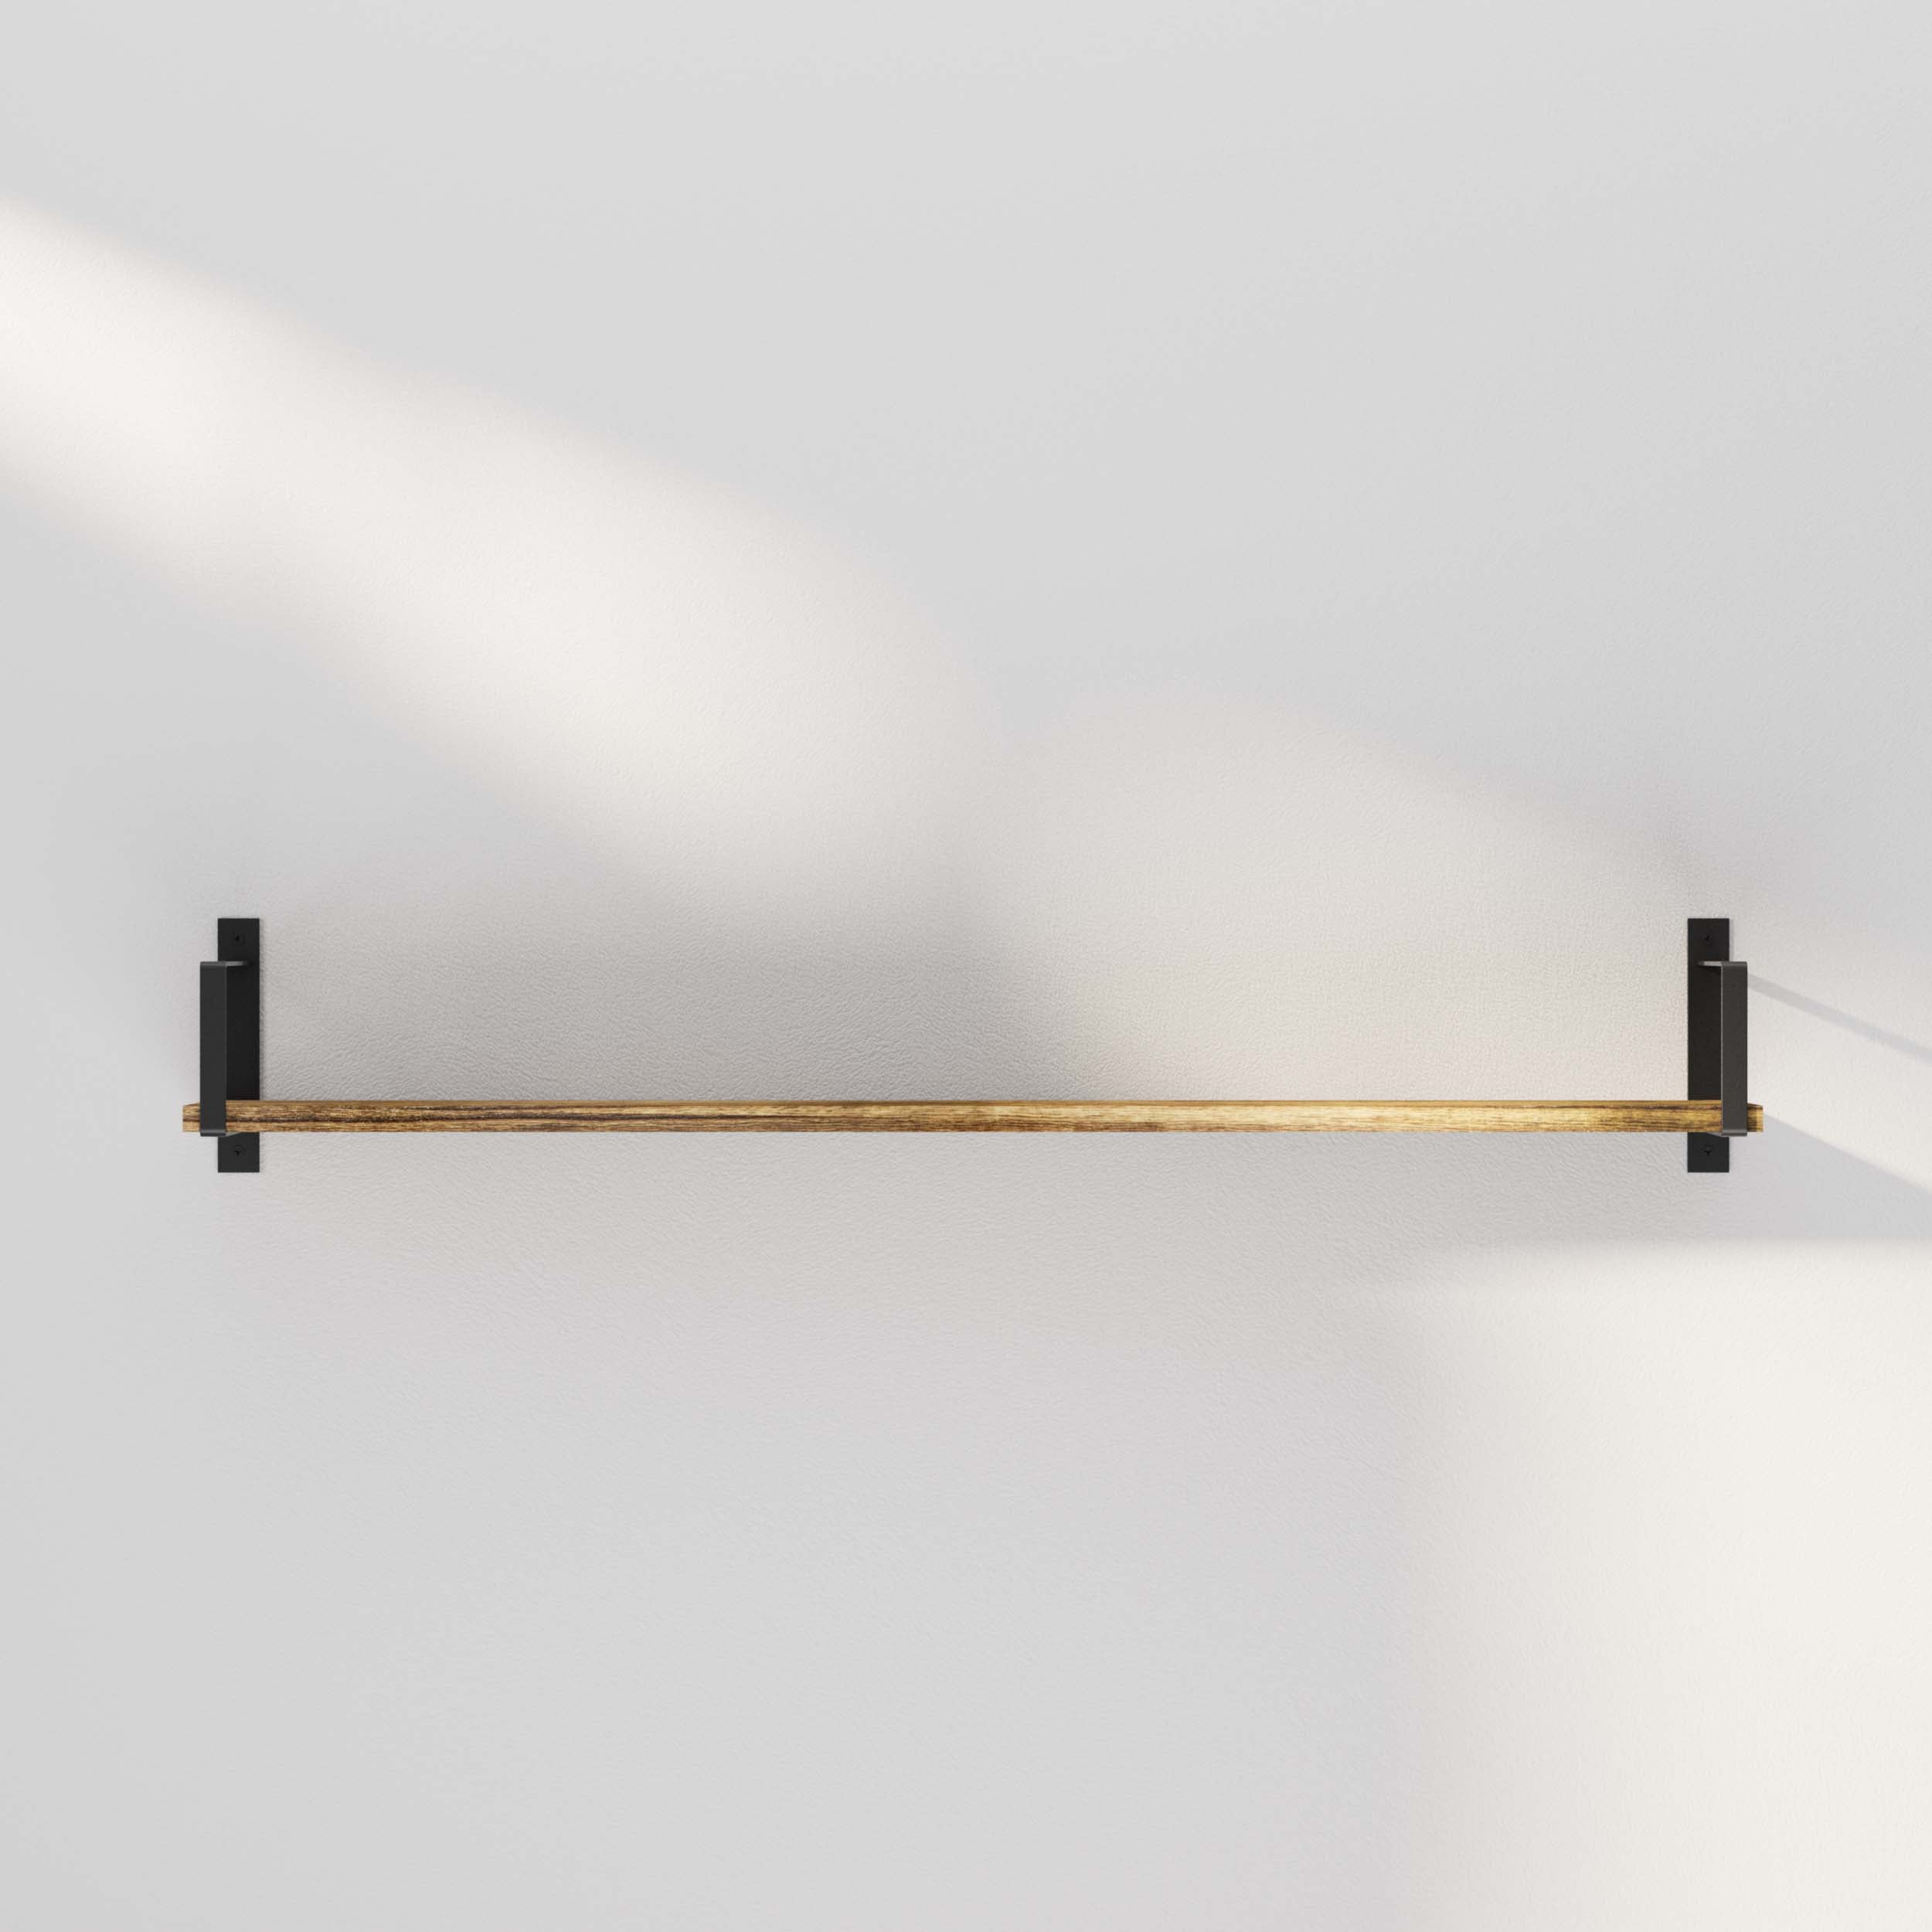 Empty wooden shelf mounted on a wall with soft light casting a diagonal shadow, emphasizing minimalism.